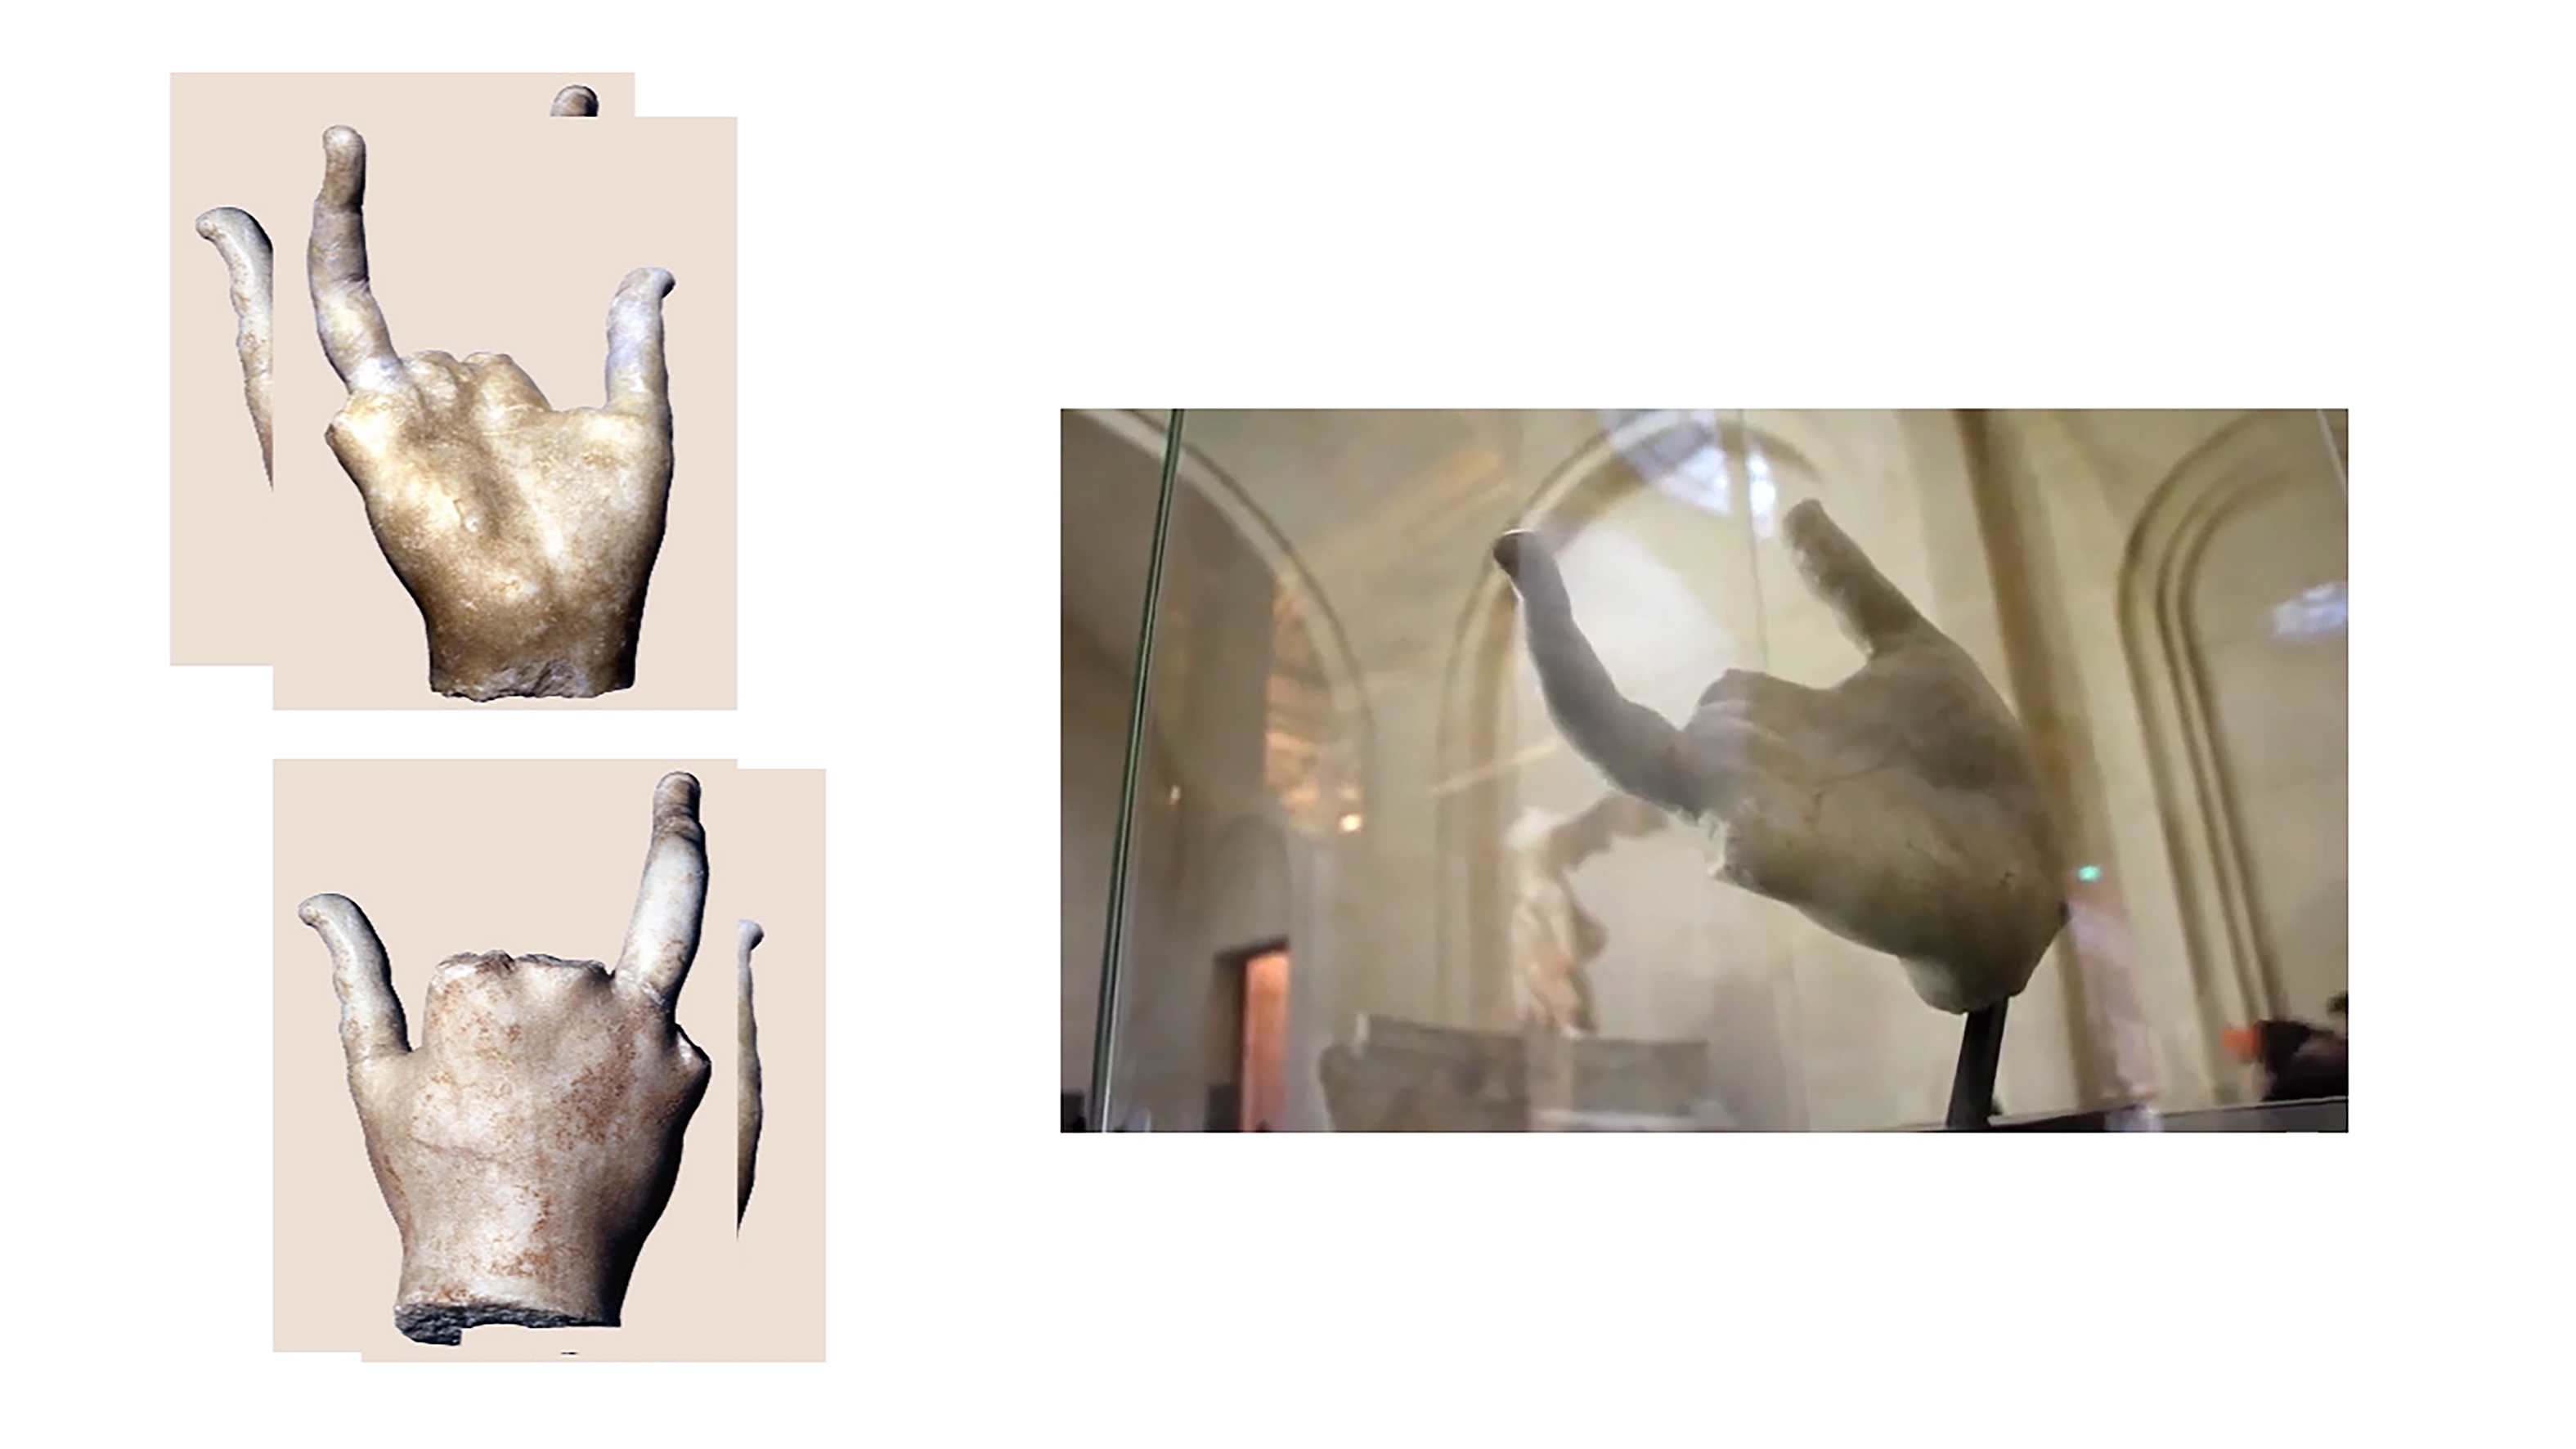 Video still showing three images of stone-sculpture of a hand.